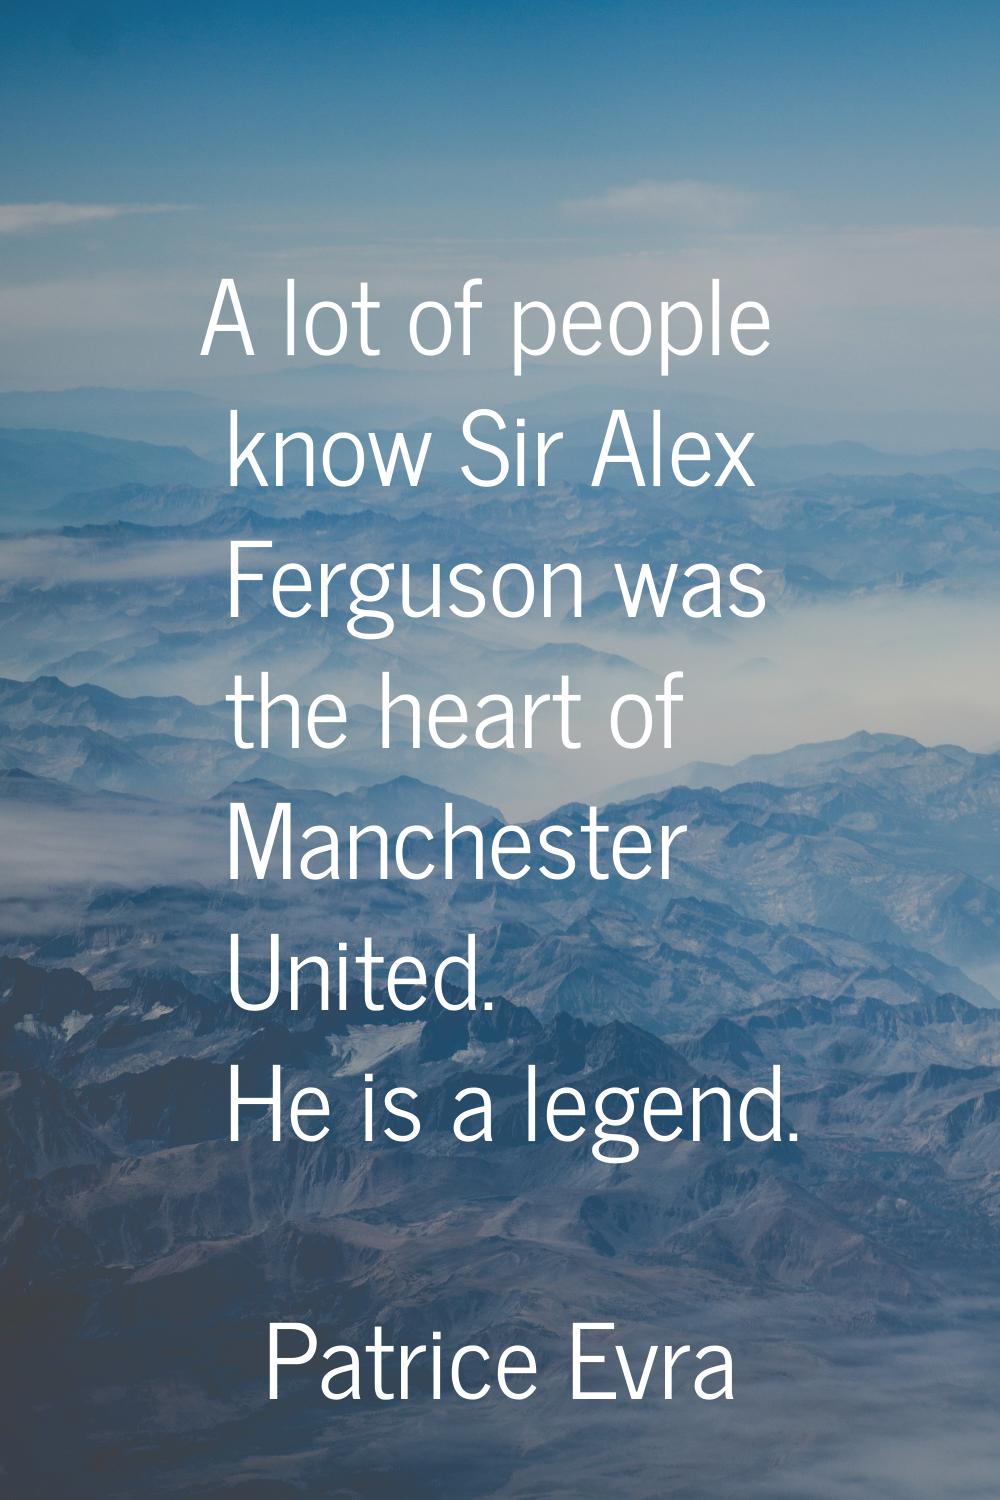 A lot of people know Sir Alex Ferguson was the heart of Manchester United. He is a legend.